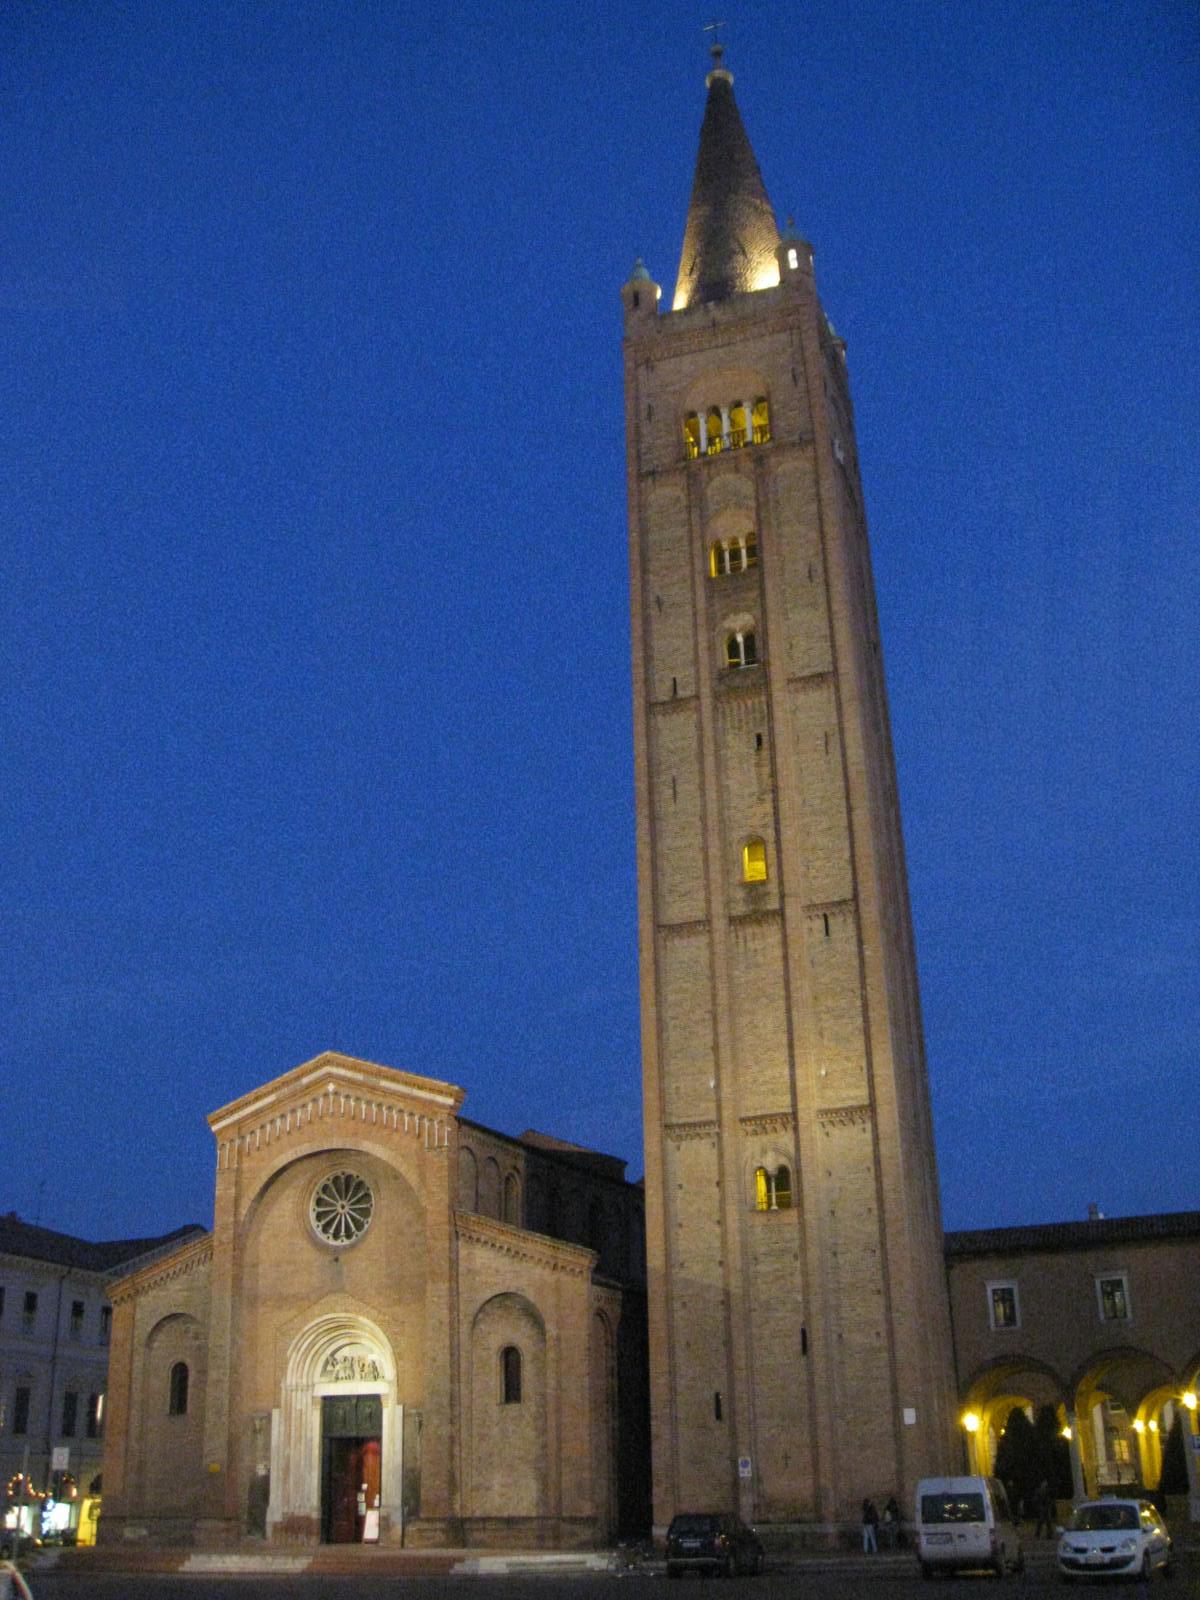 San Mercuriale in Forlì, the location of many tourtures. 